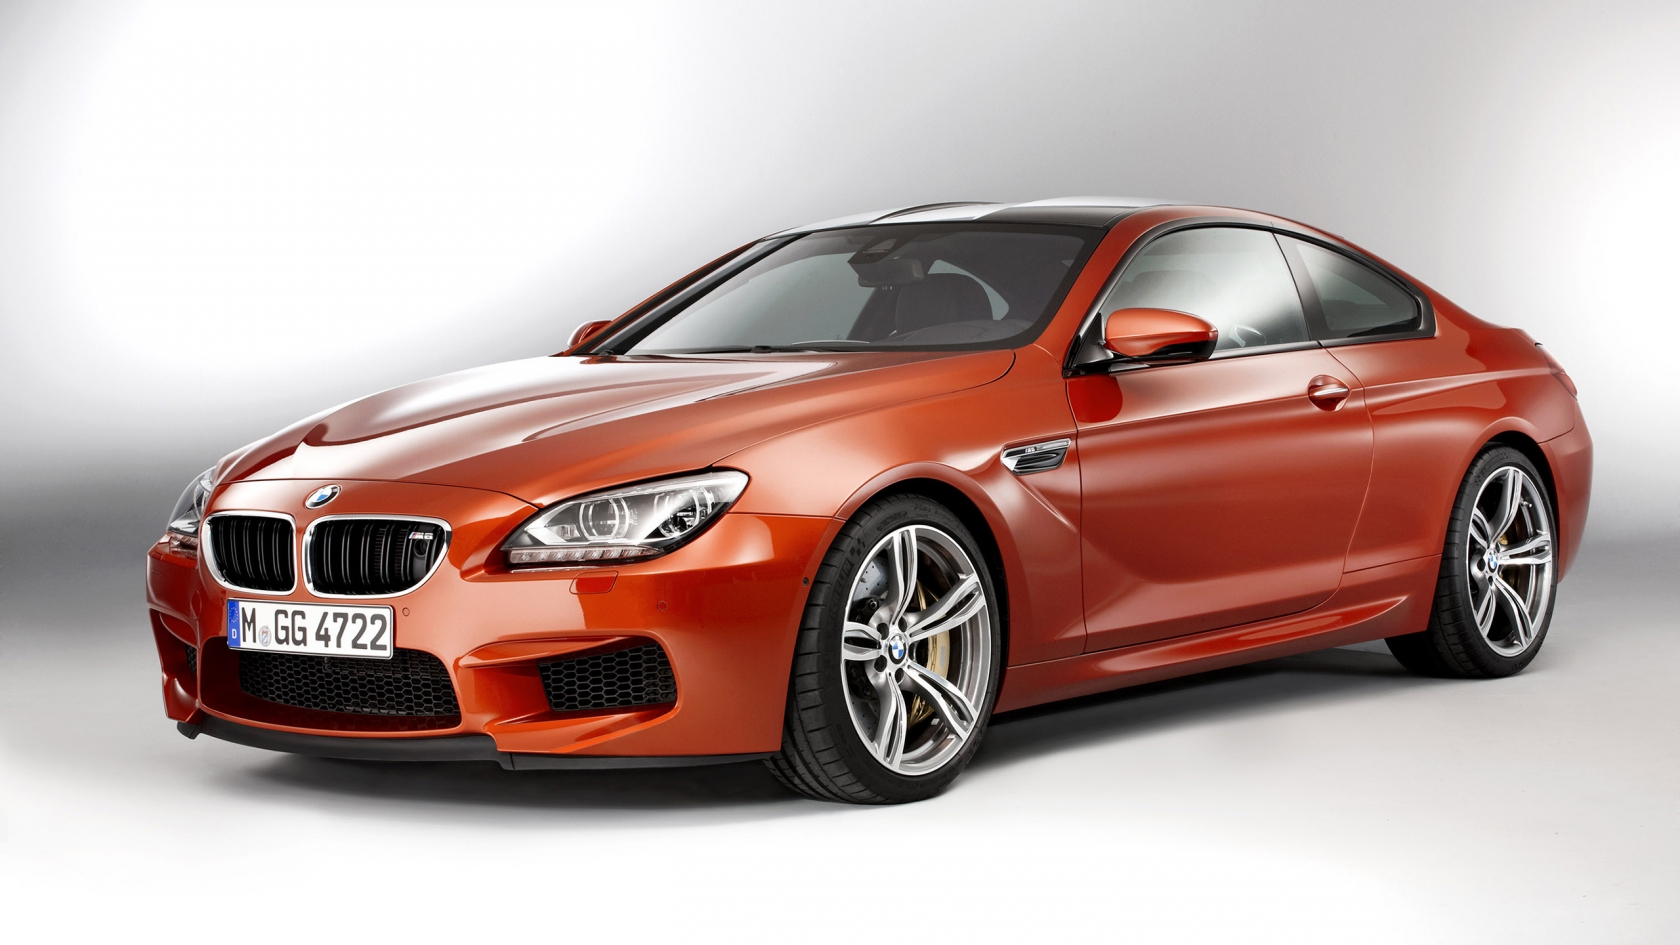 2013 BMW M6 Coupe Studio for 1680 x 945 HDTV resolution